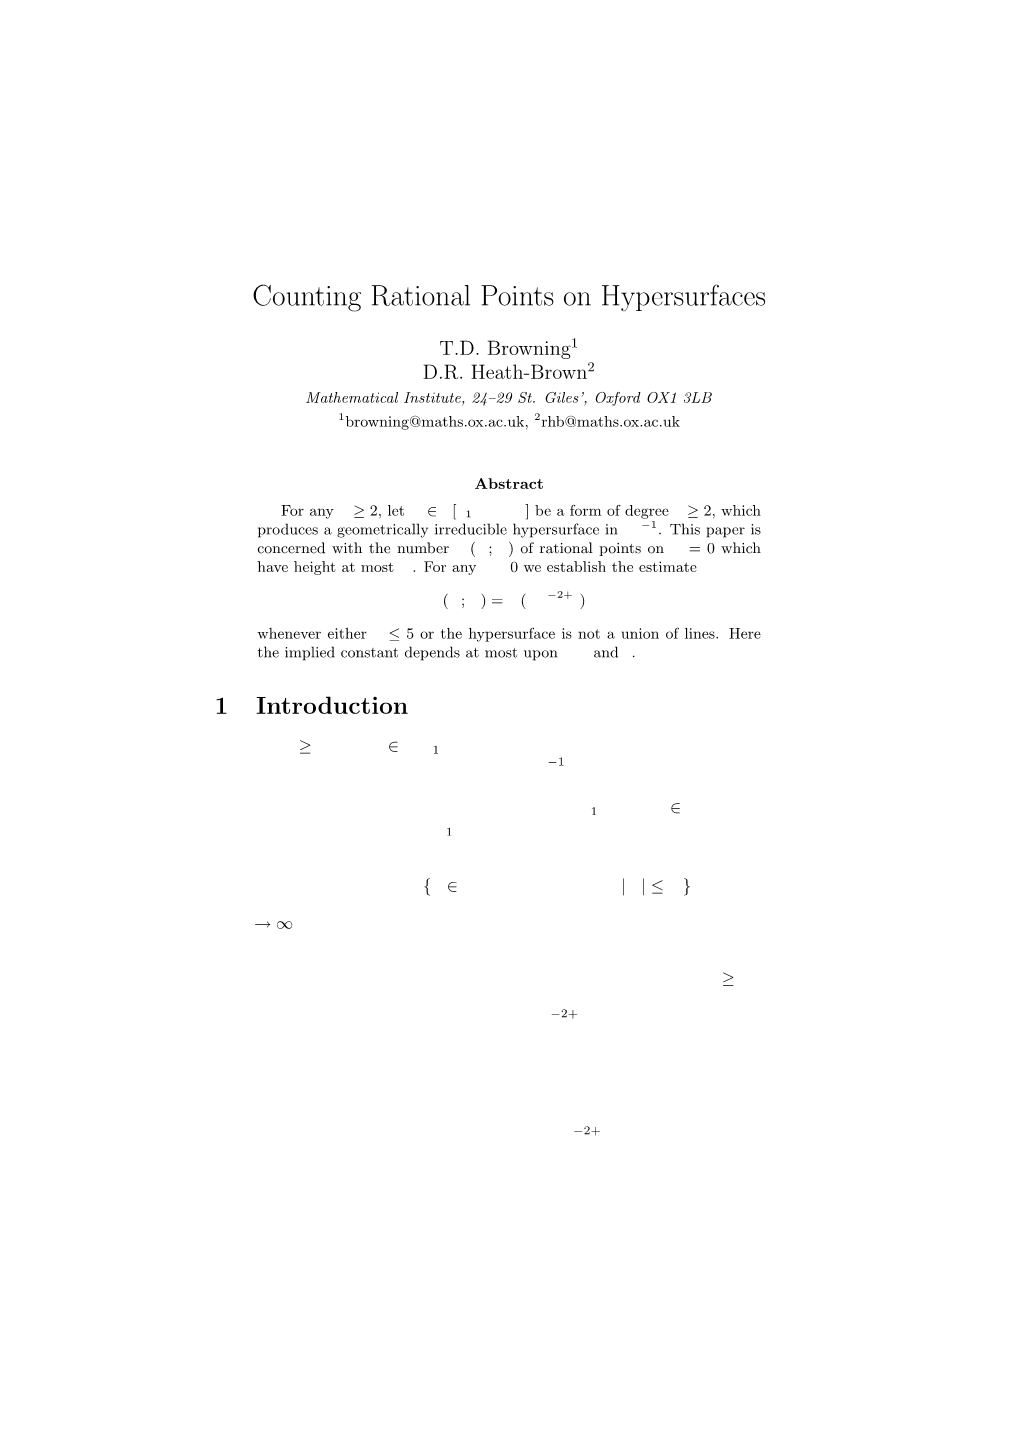 Counting Rational Points on Hypersurfaces